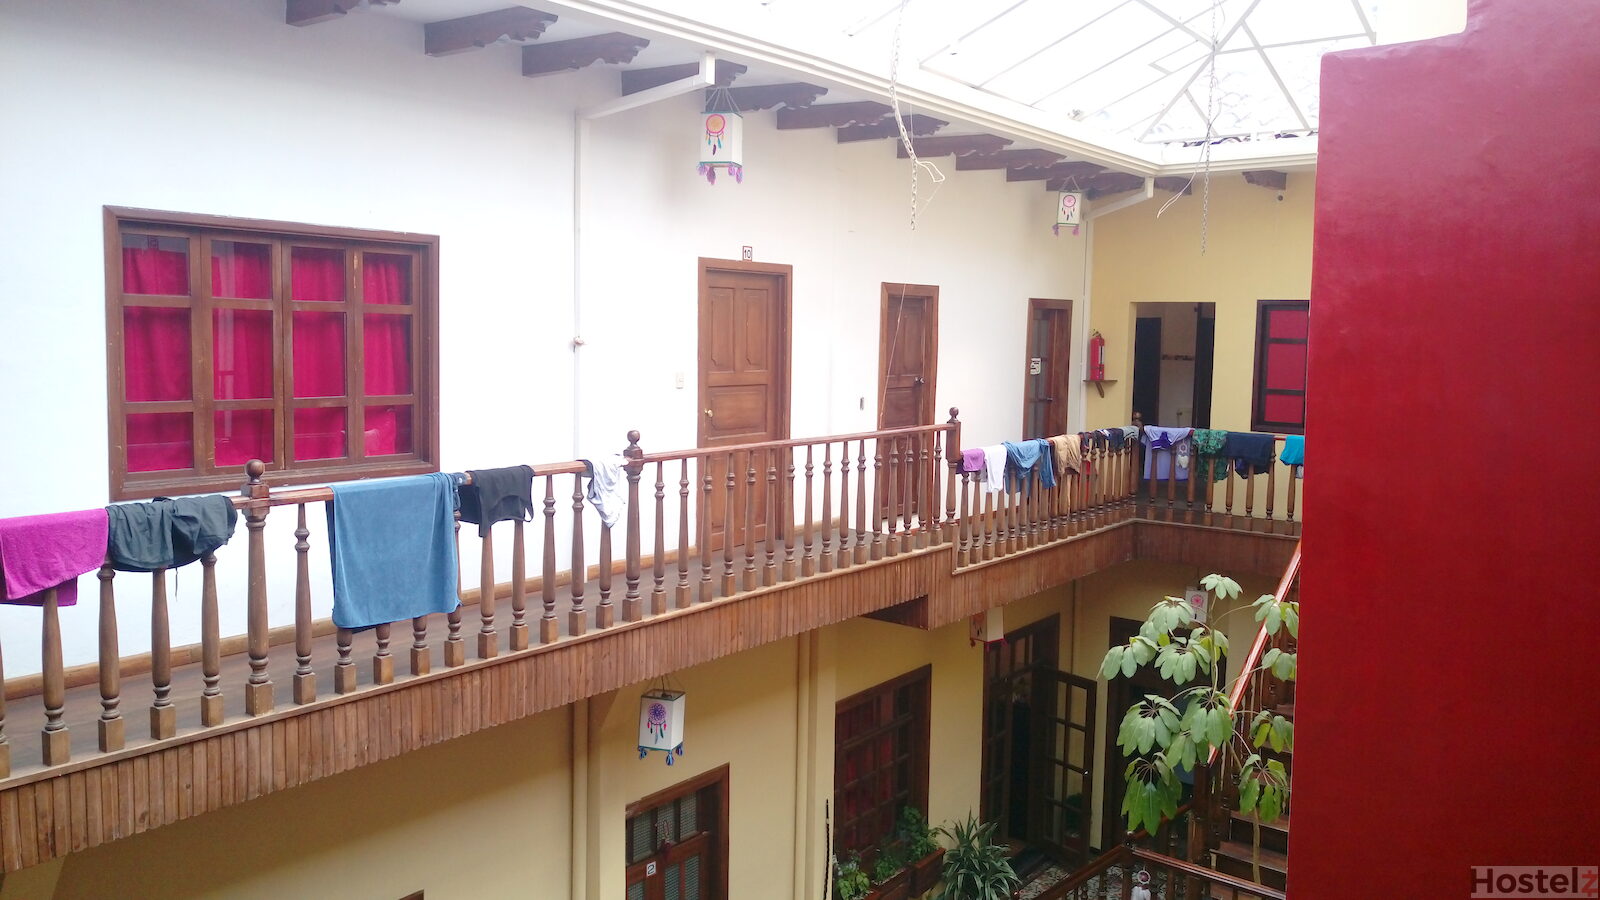 The hostel is inside a double-storey colonial mansion.